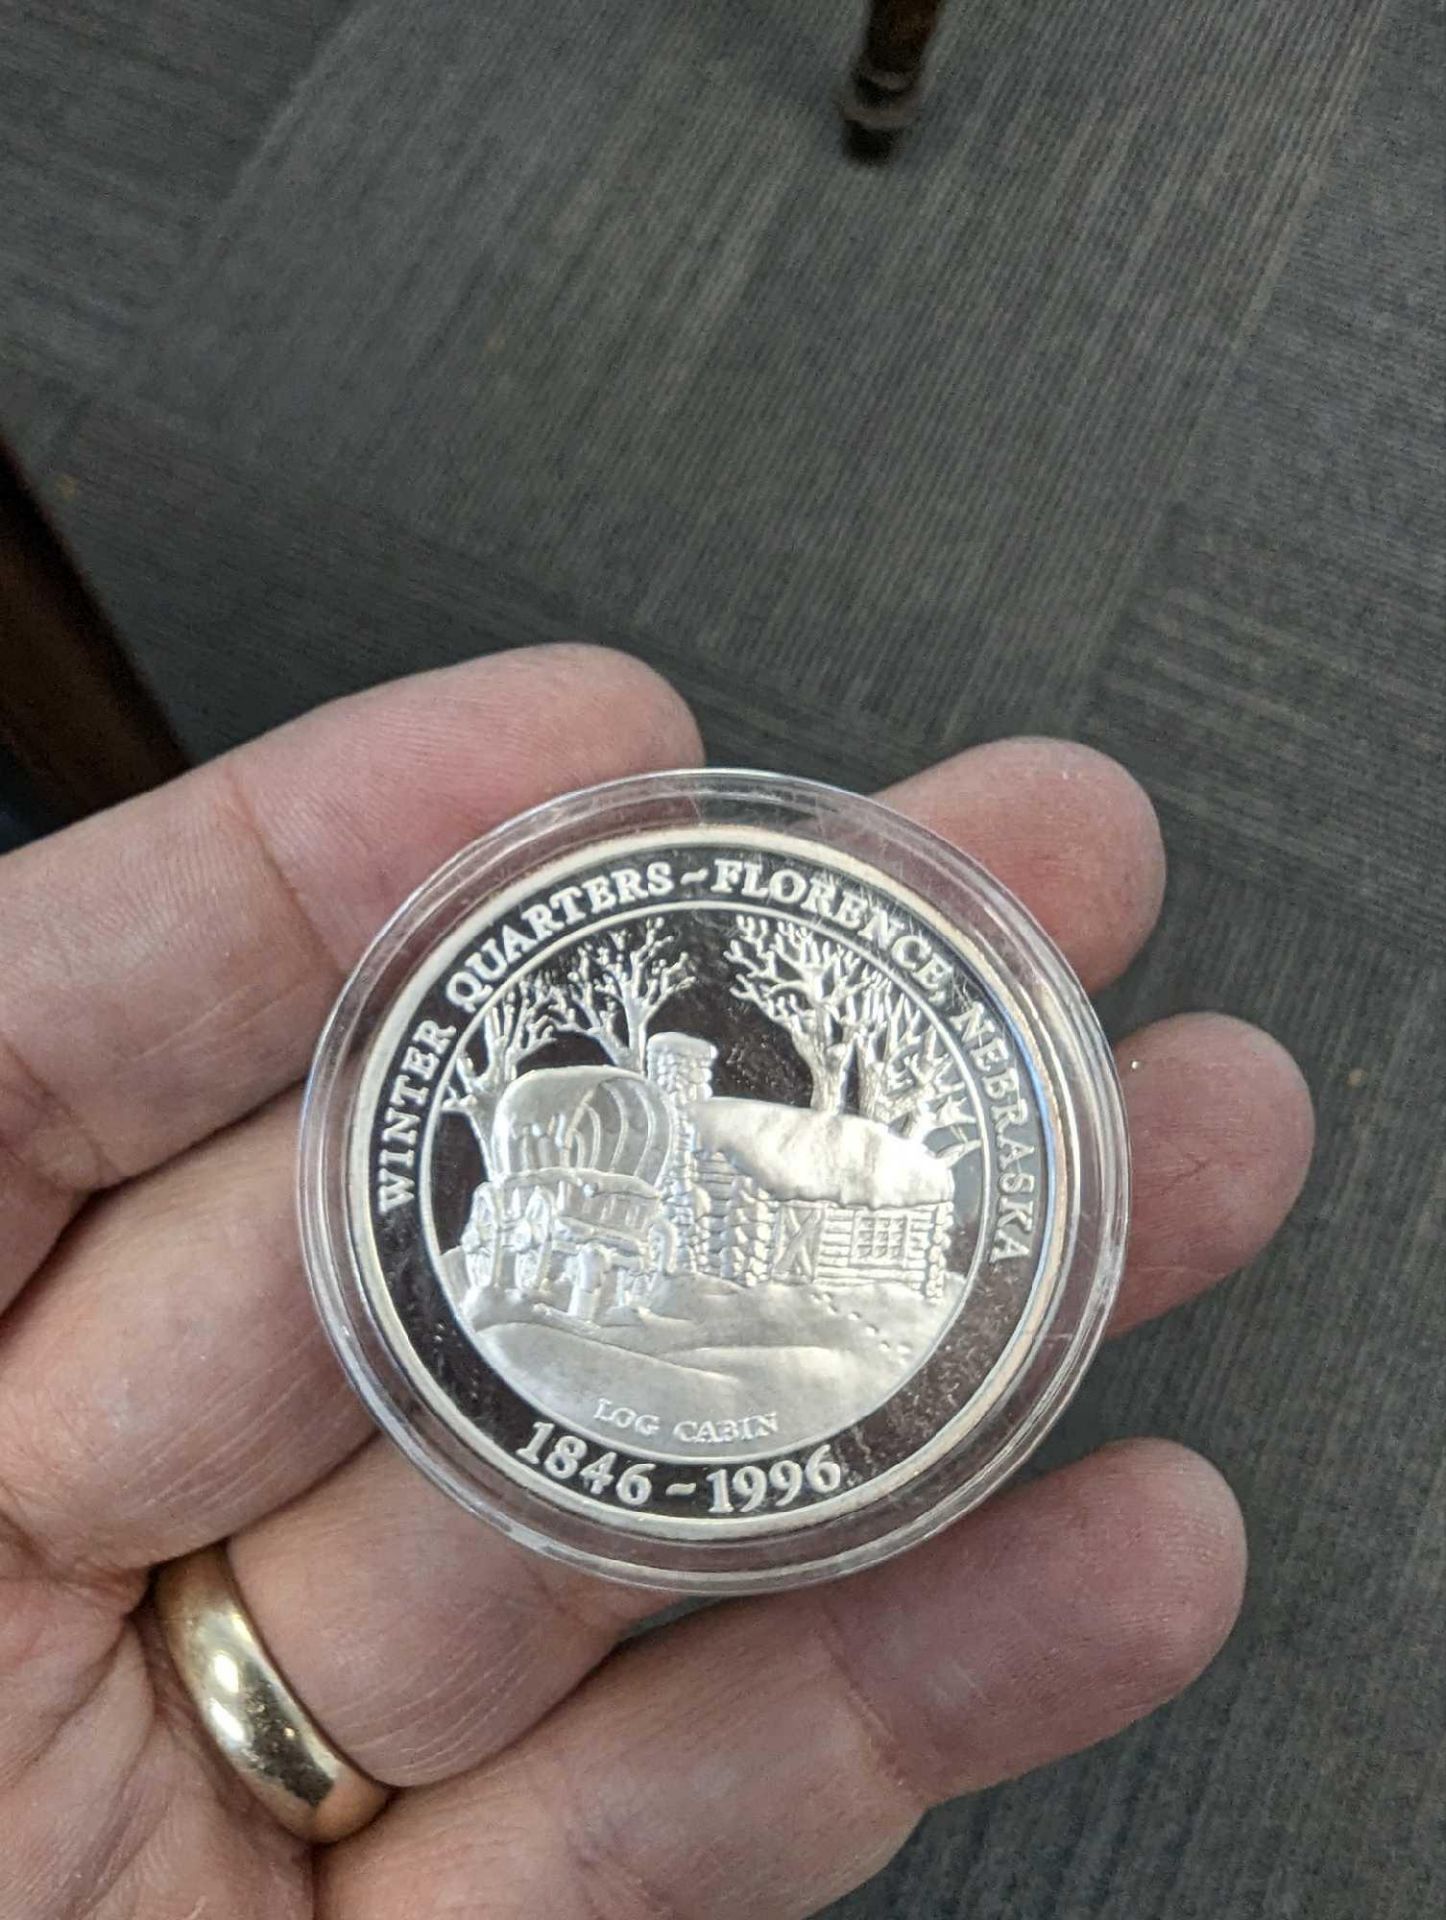 Joseph Smith Martyred and winter quarters Silver Coin - Image 2 of 5